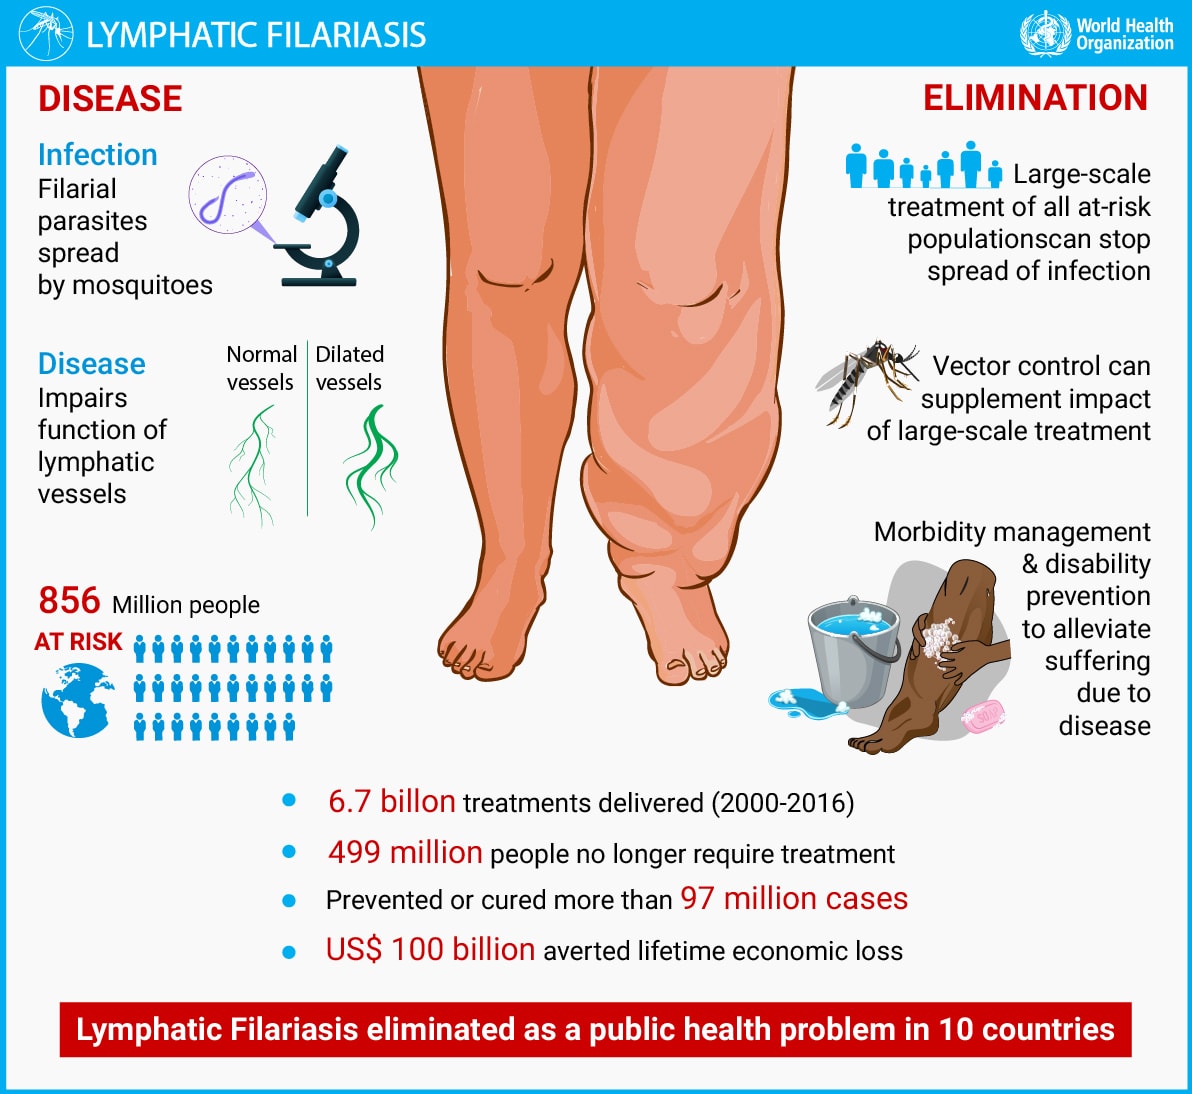 Full size Lymphatic filariasis infographic